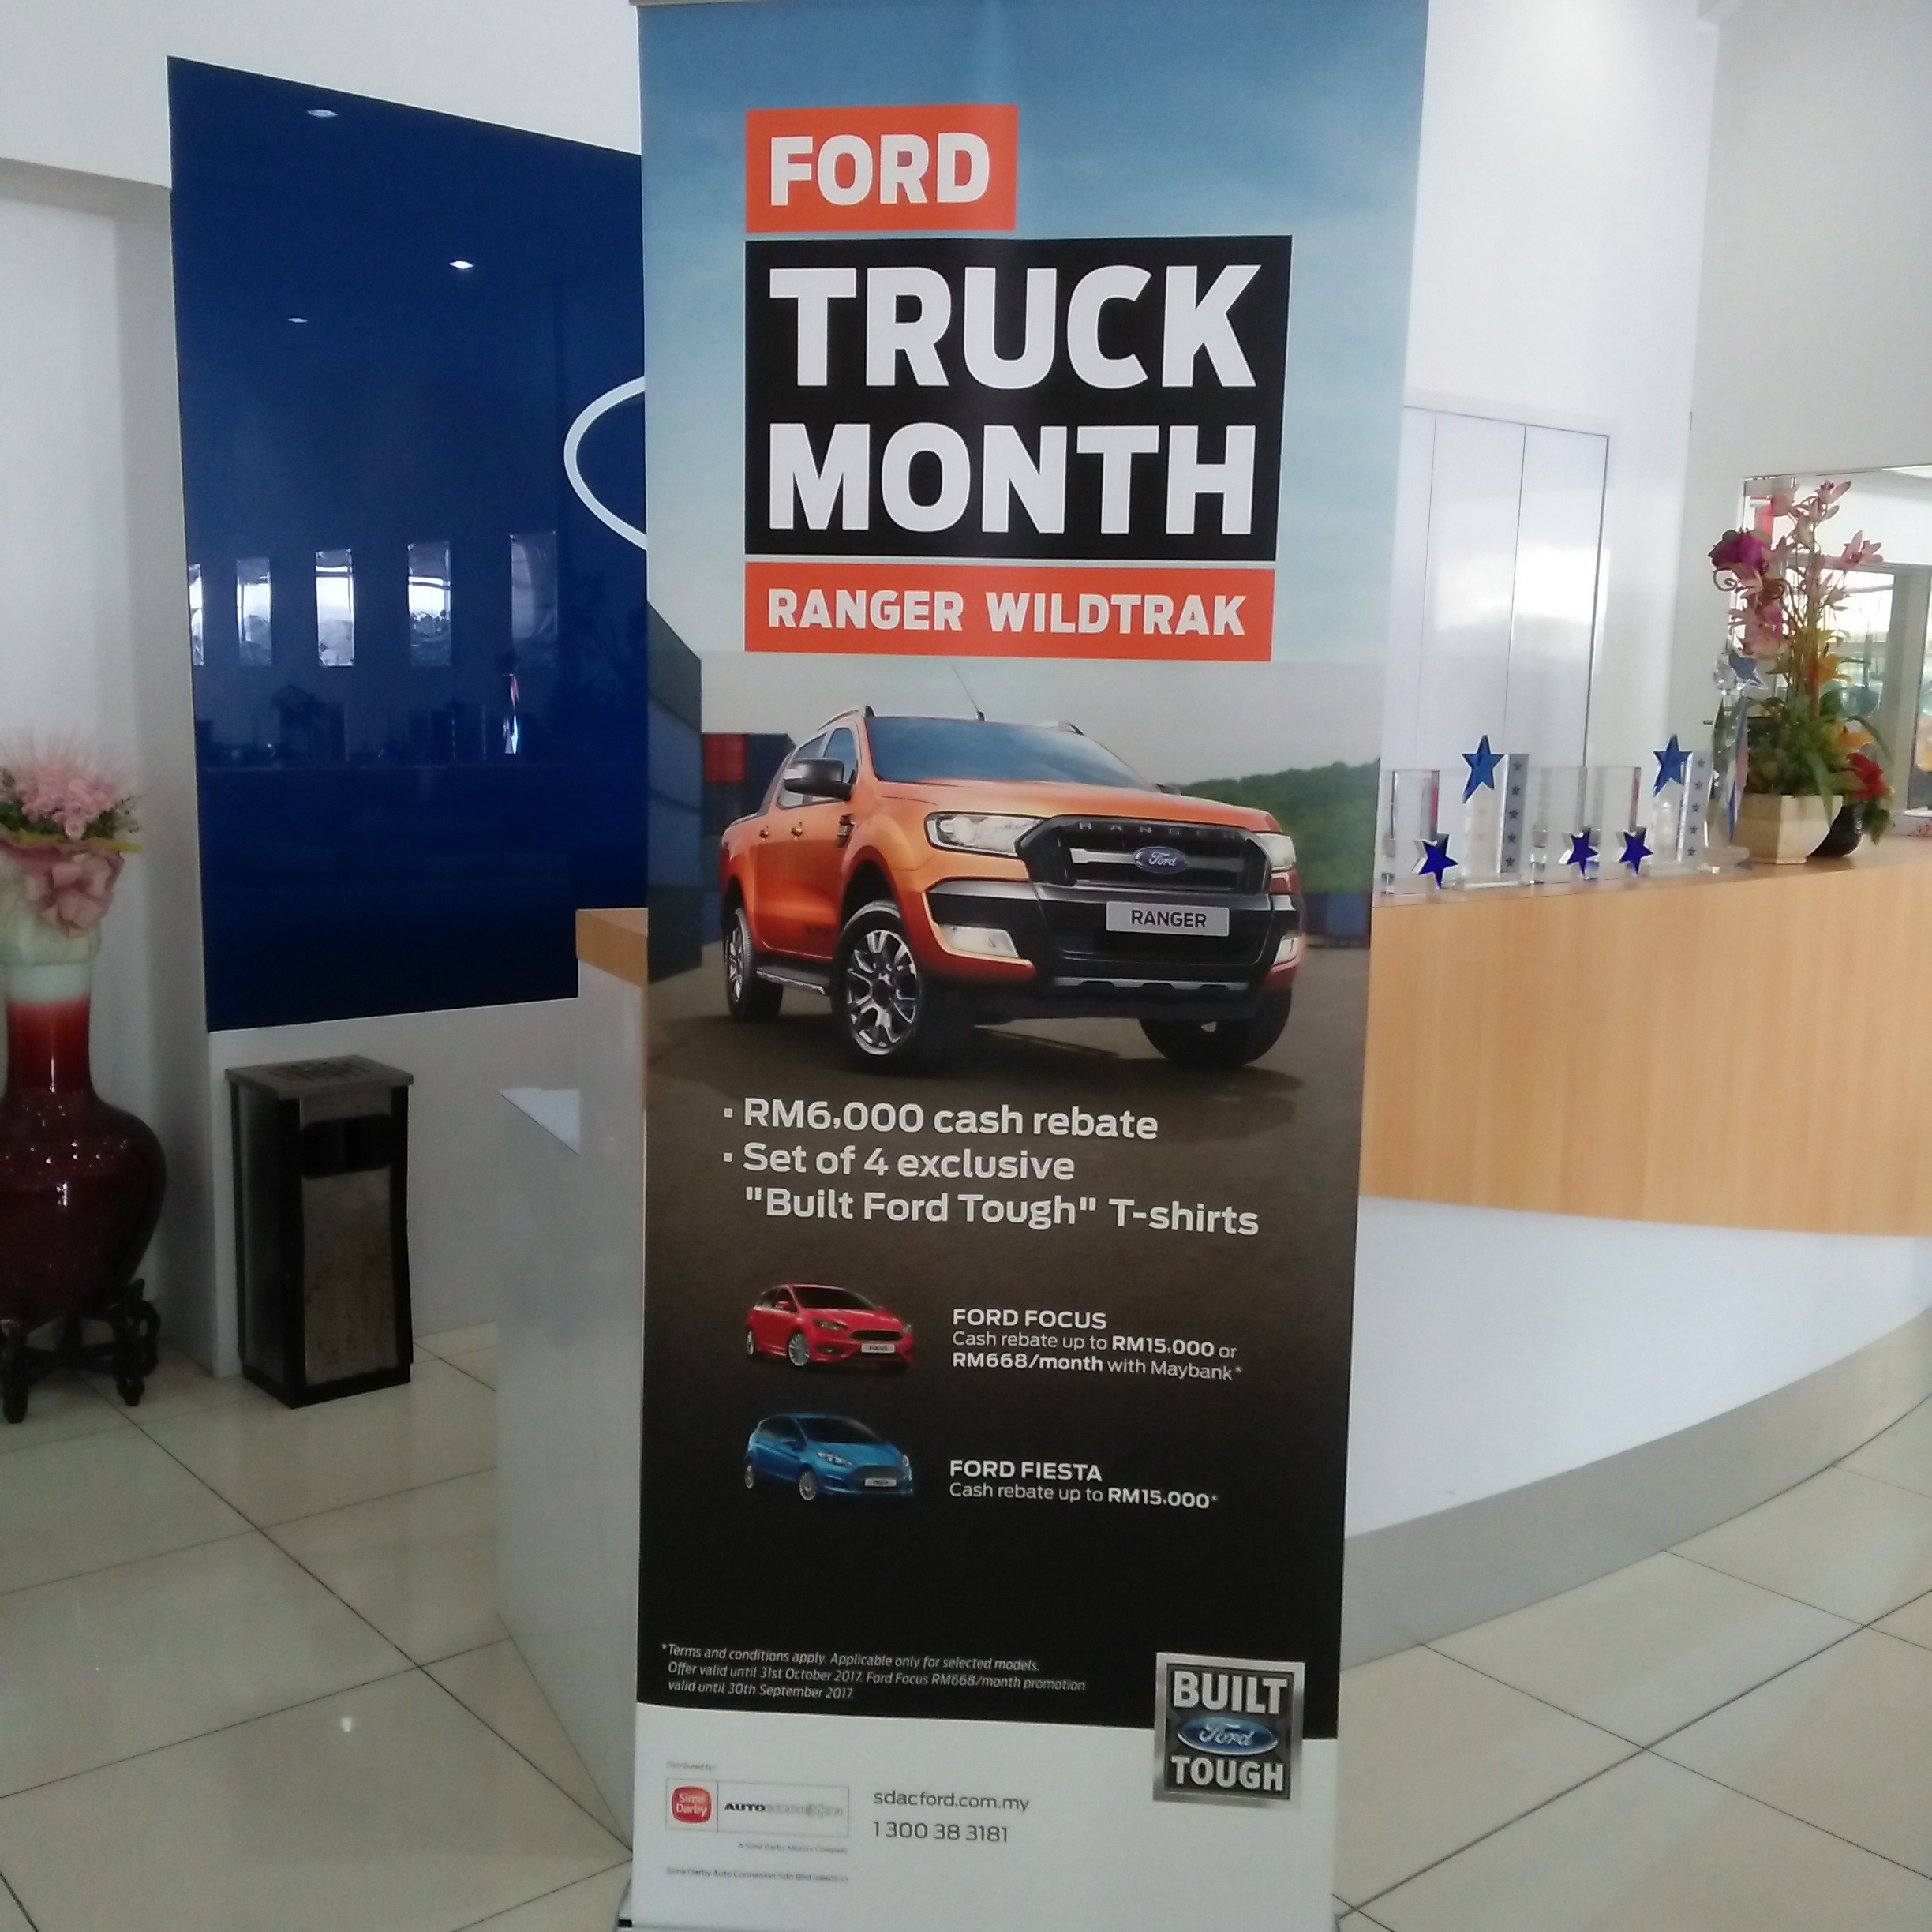 FORD TRUCK MONTH AUGUST